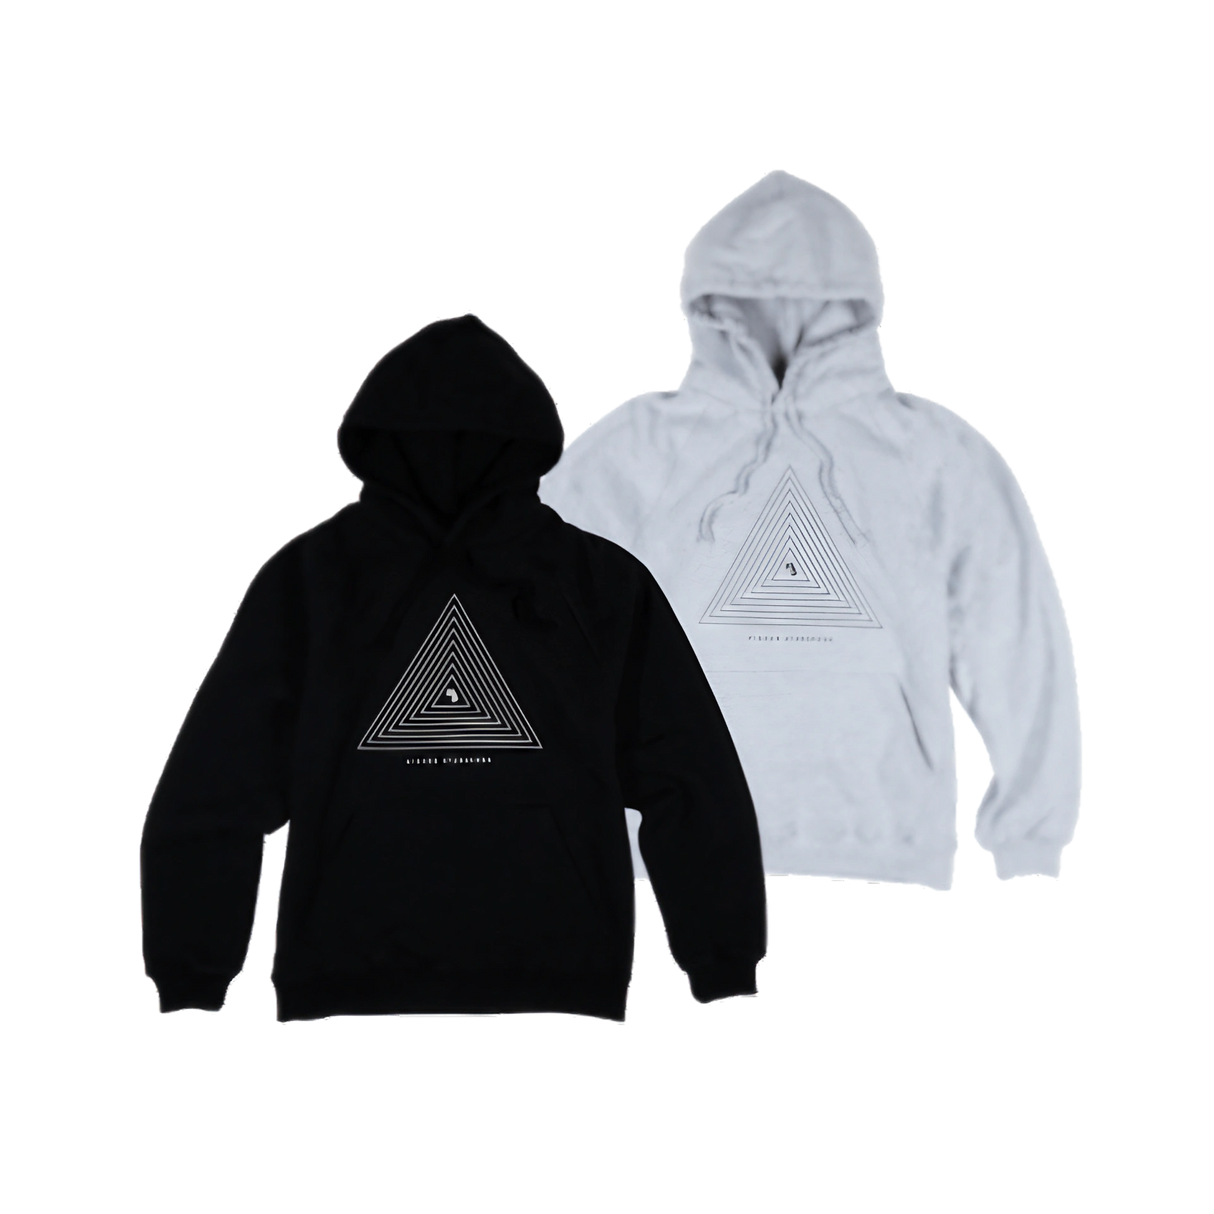 Higher Standards Hoodie in black and grey, unisex, with concentric triangle logo, front view